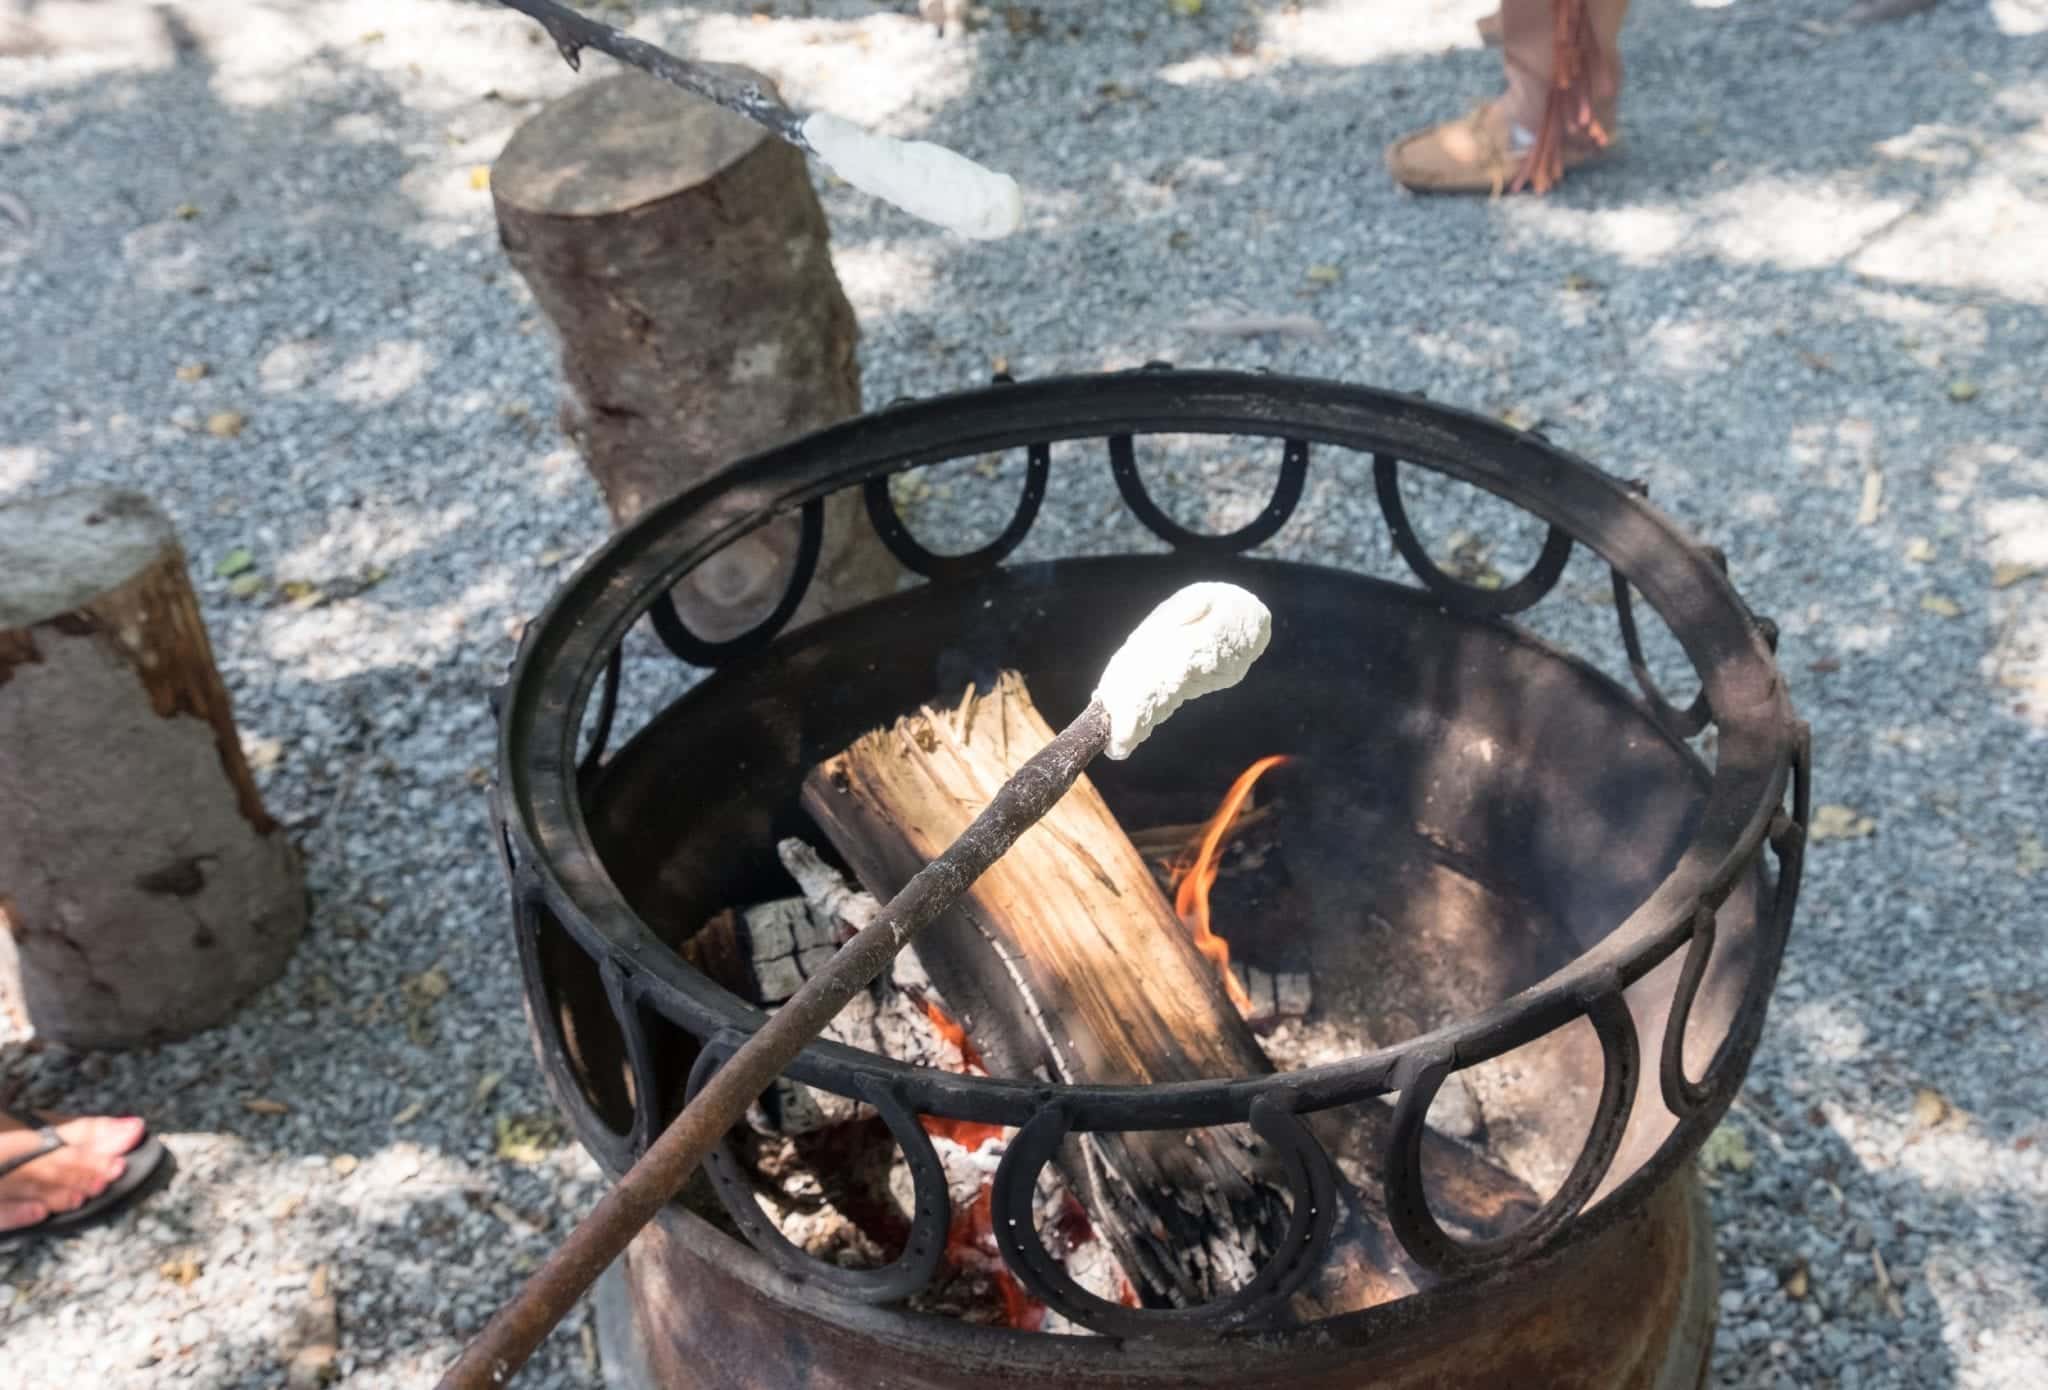 Bread dough wrapped around an iron poker and cooked over a fire.